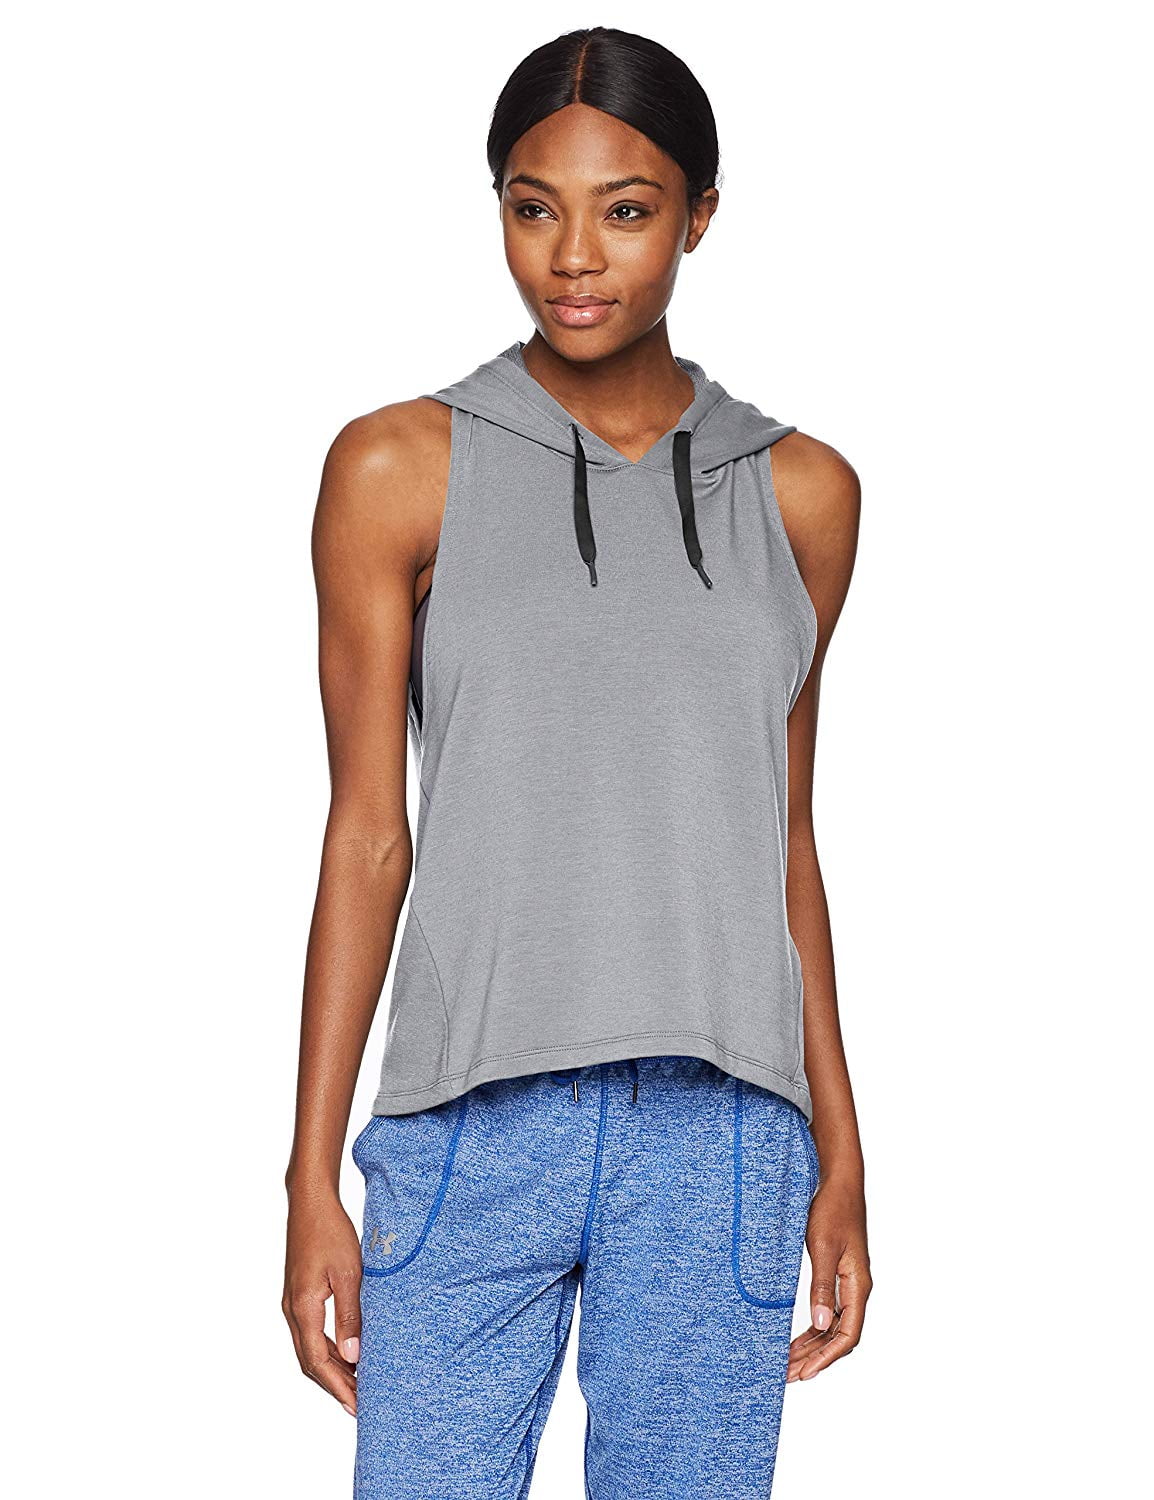 Under Armour Womens Modal Terry Tunic 